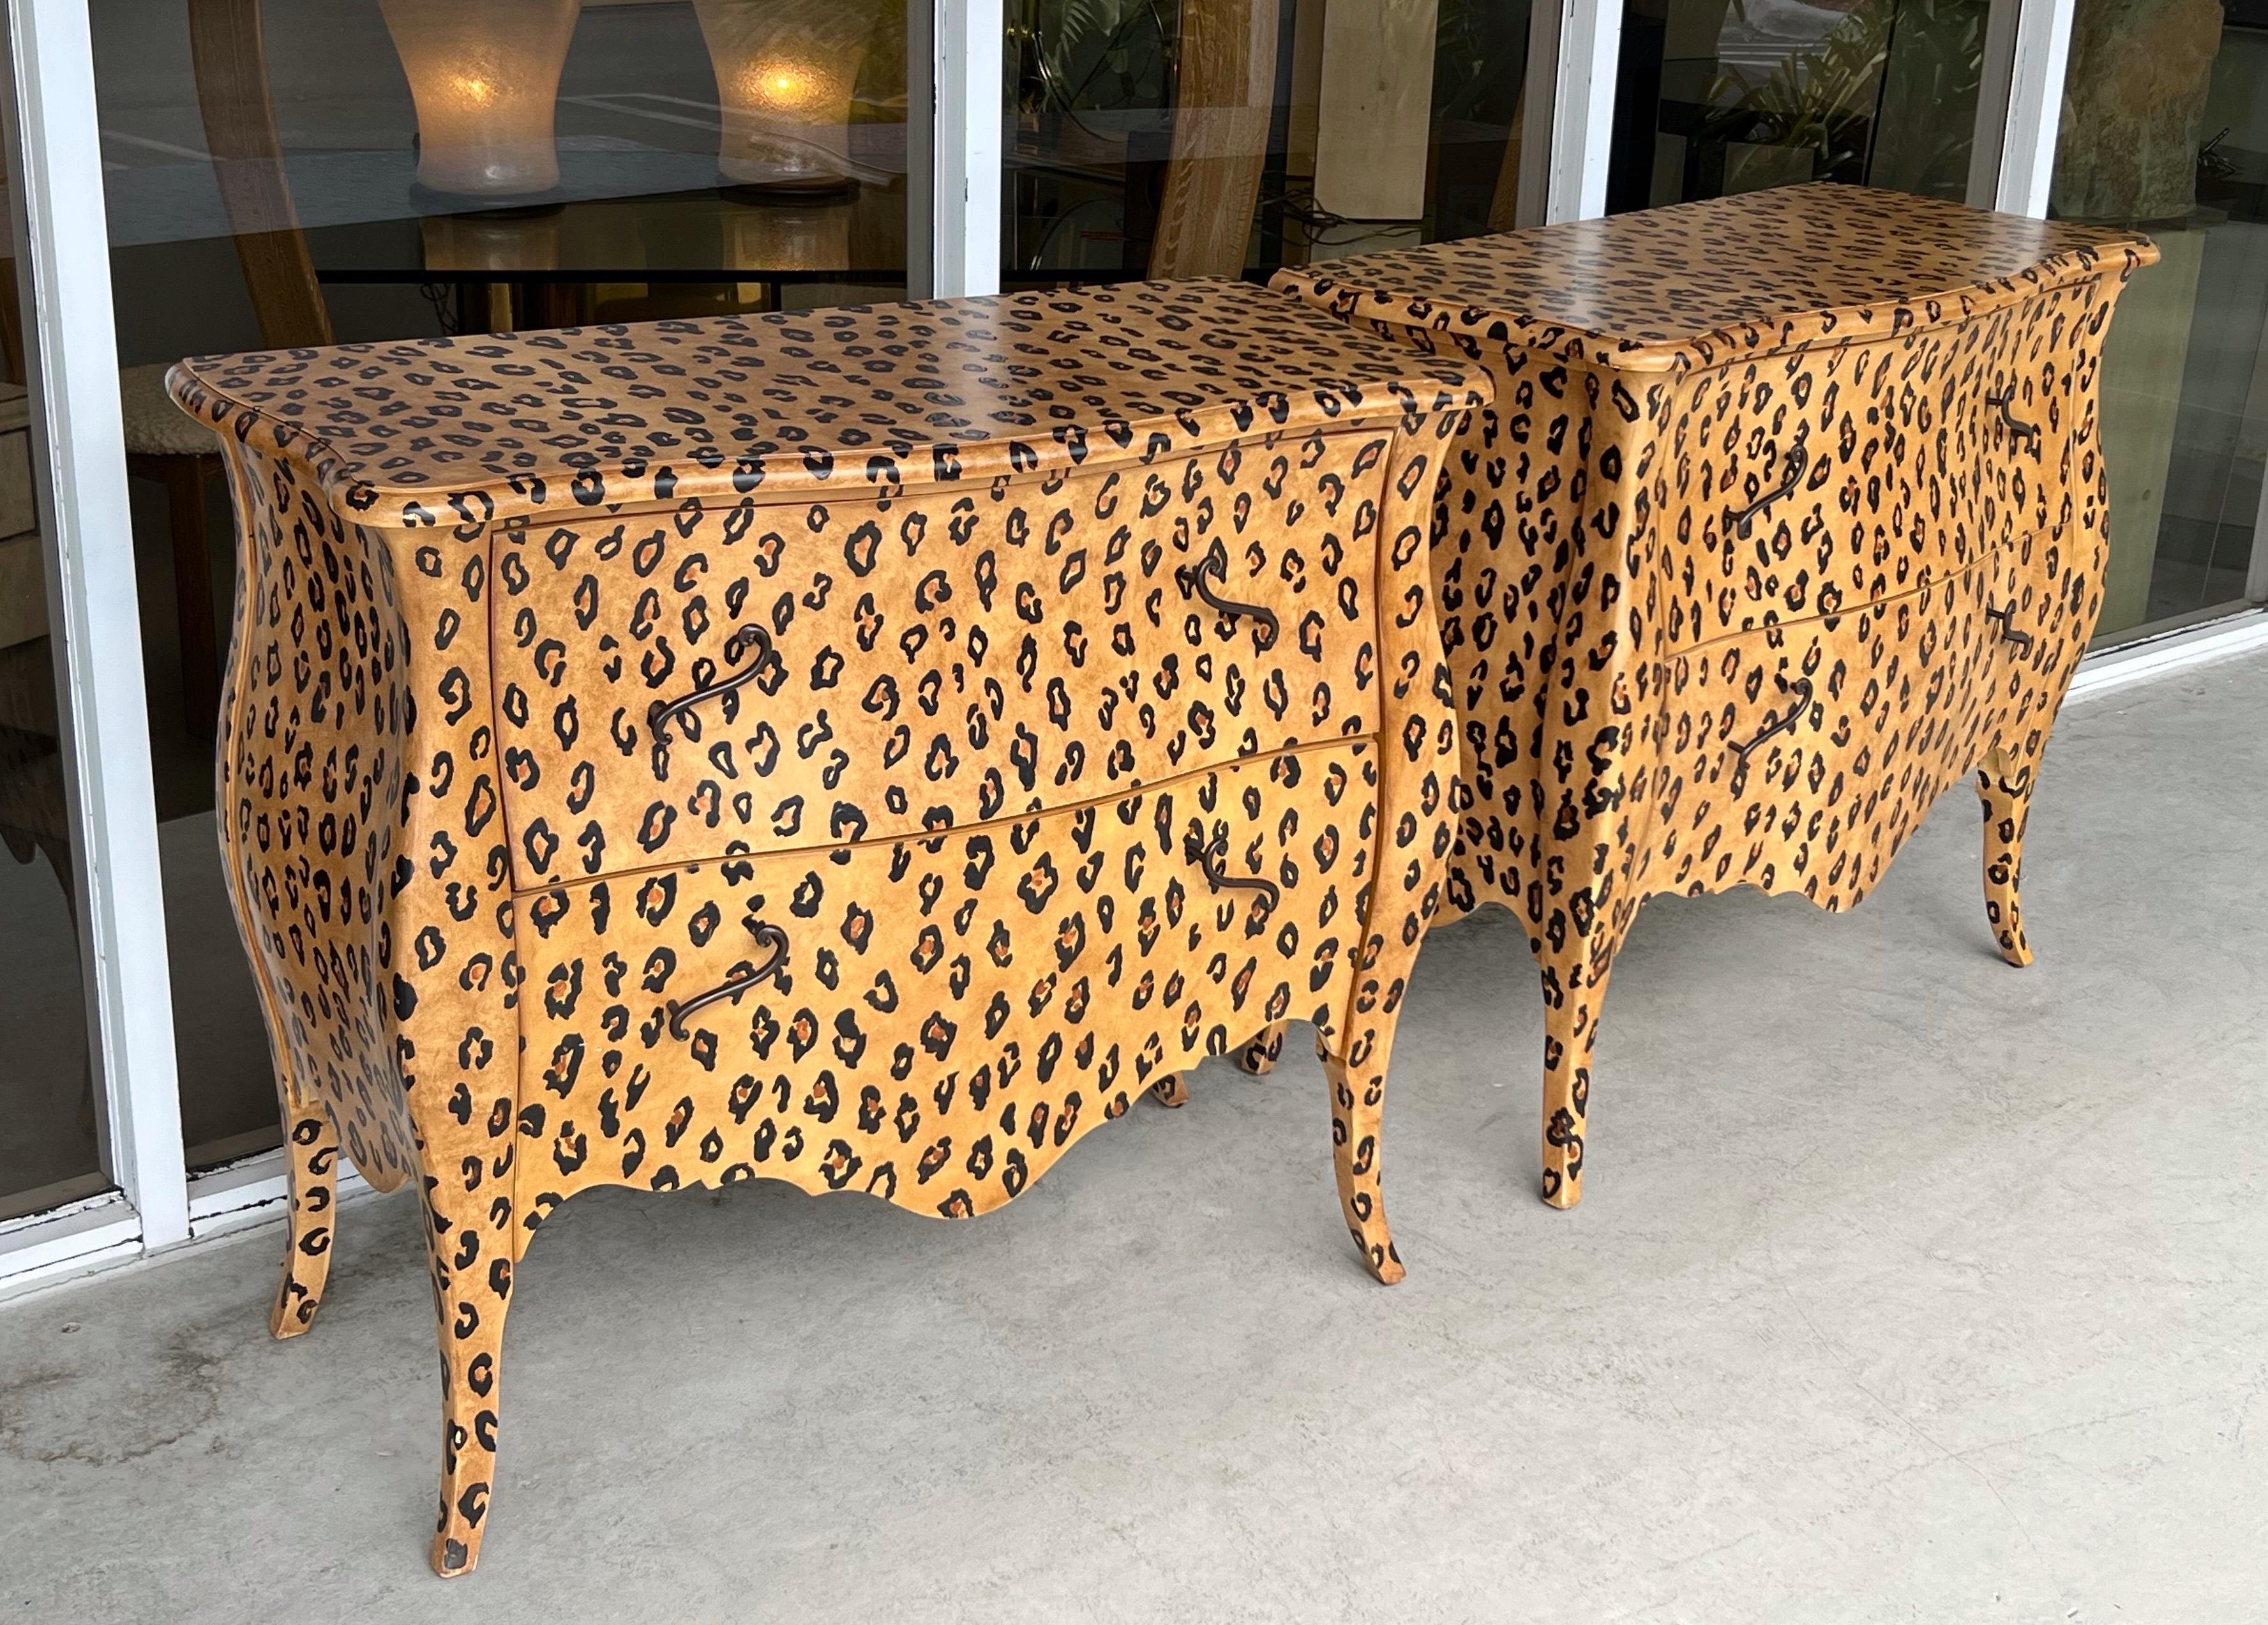 A pair of chests by Oscar de la Renta for Century. Each with 2 large drawers and bronze handles. Hand painted leopard spots cover the graceful cabinets.